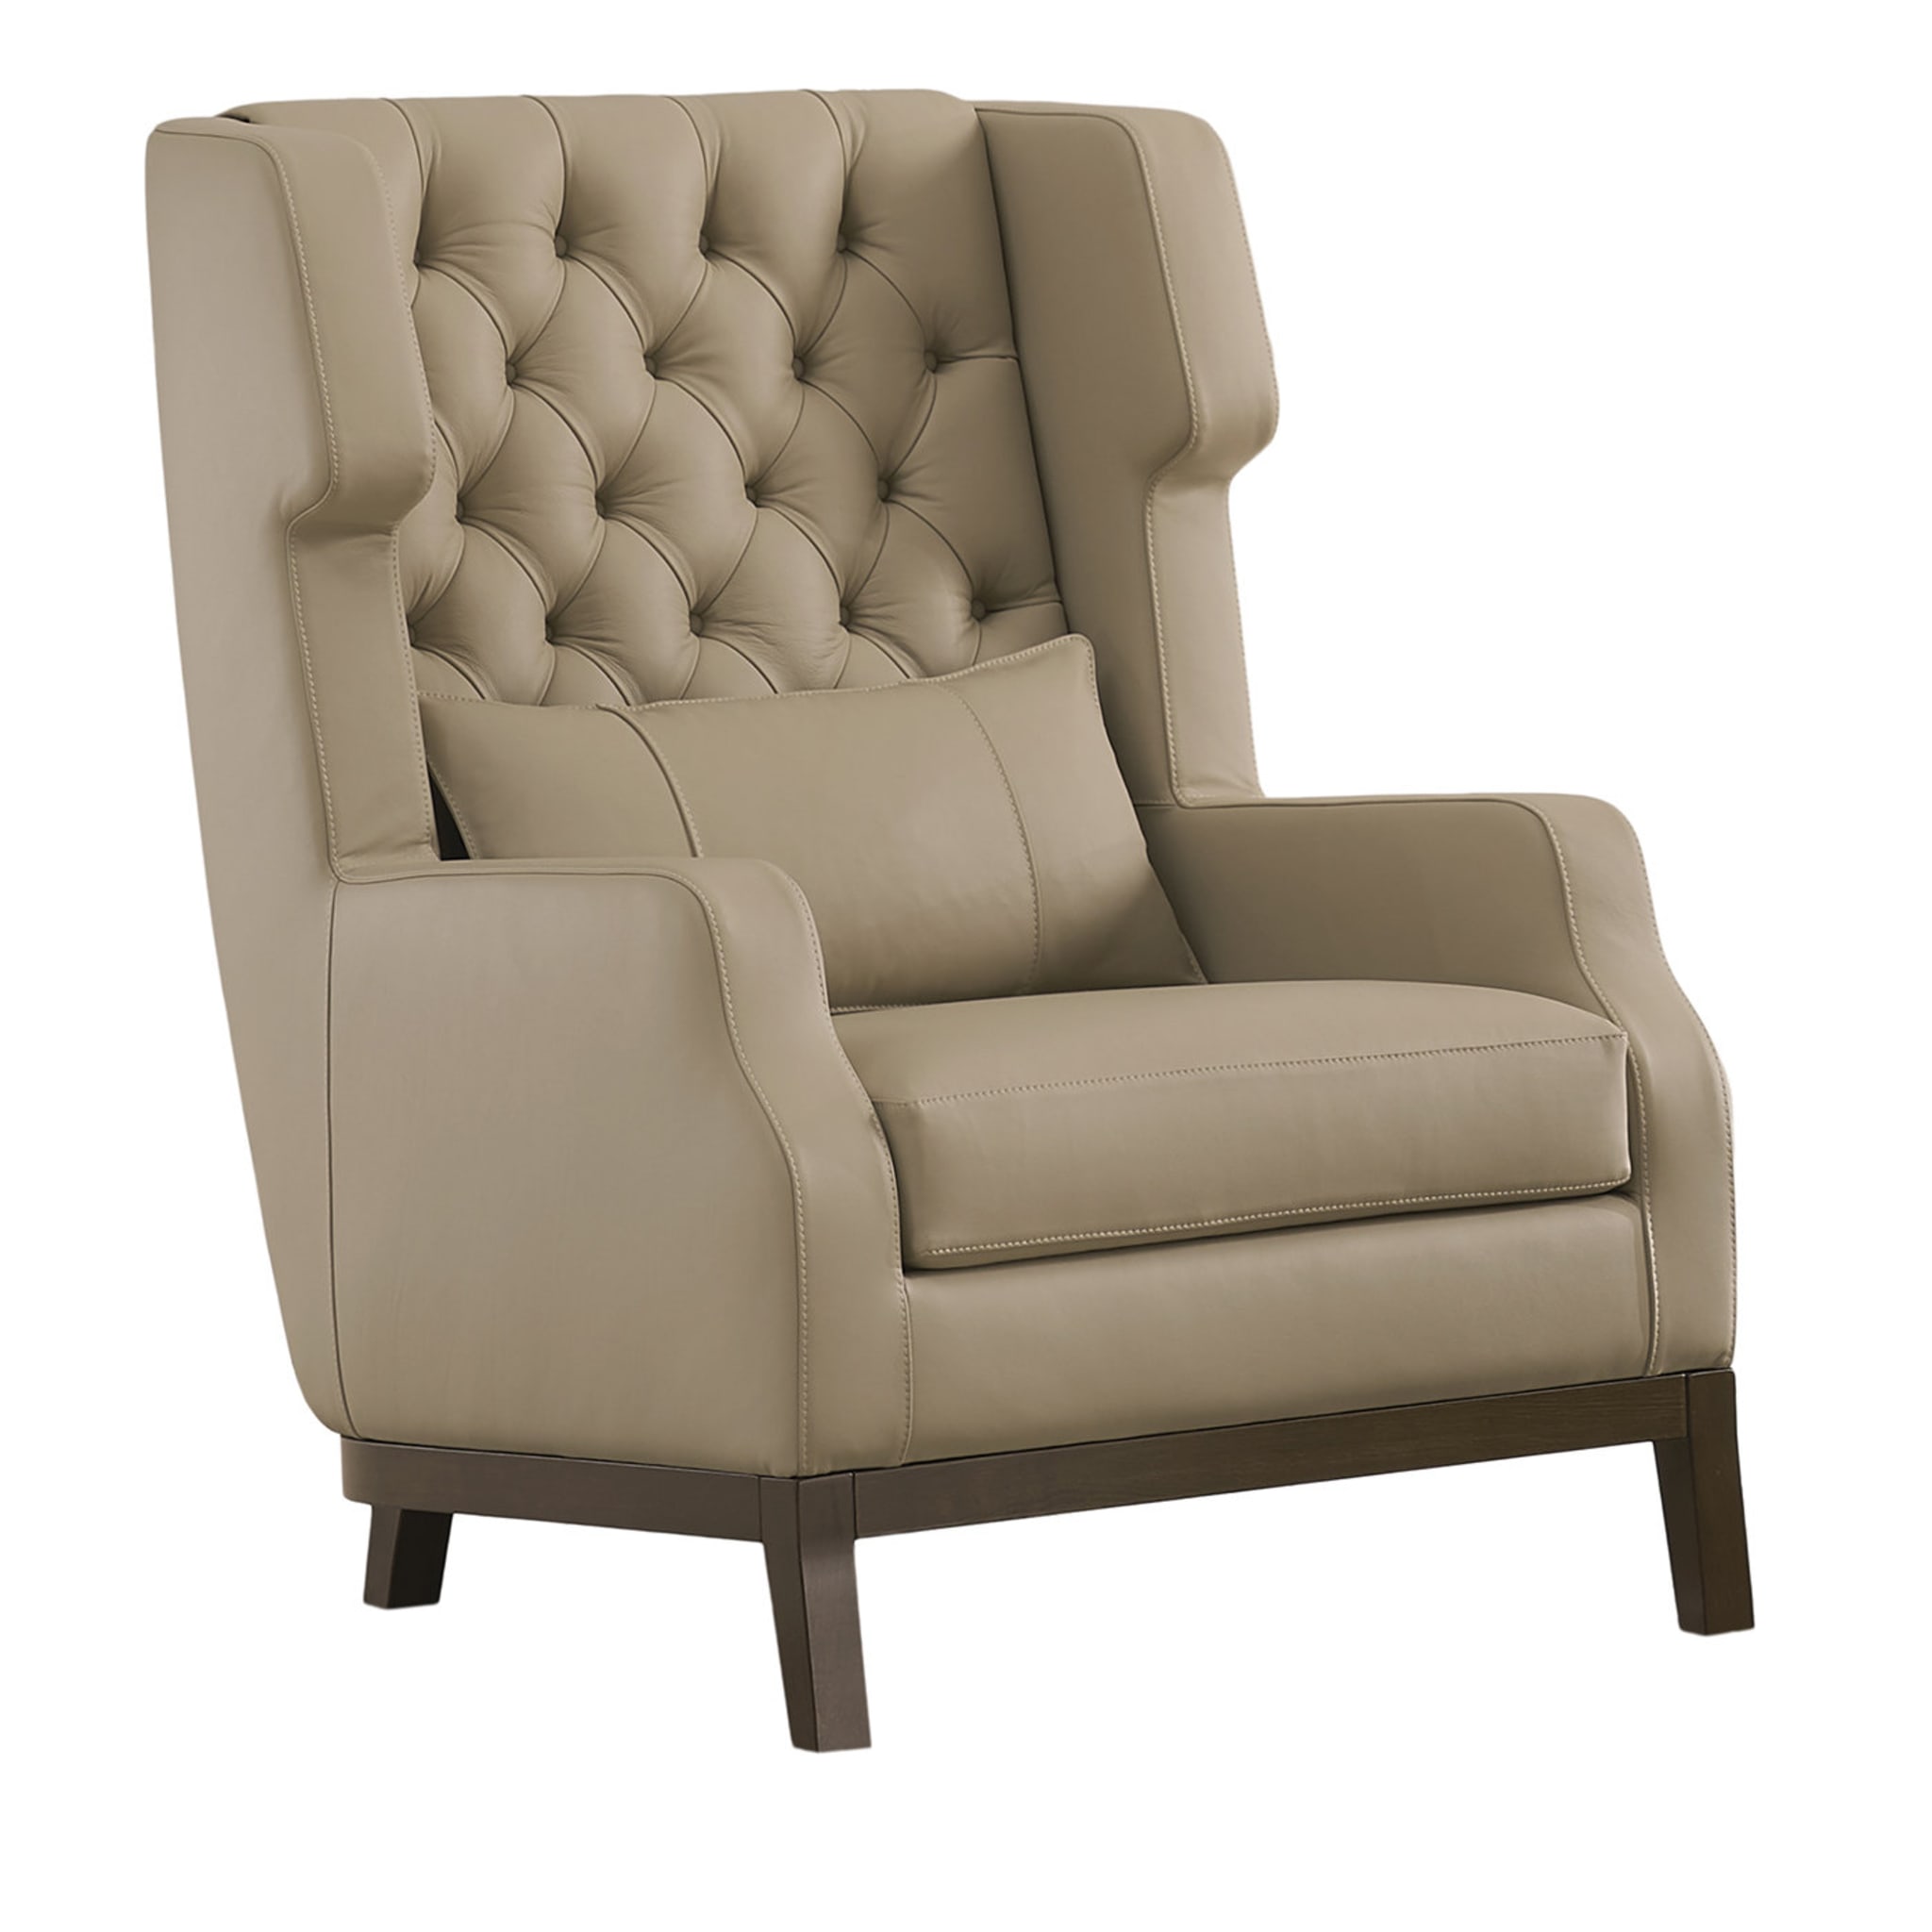 Dandy Beige Leather Armchair - Main view